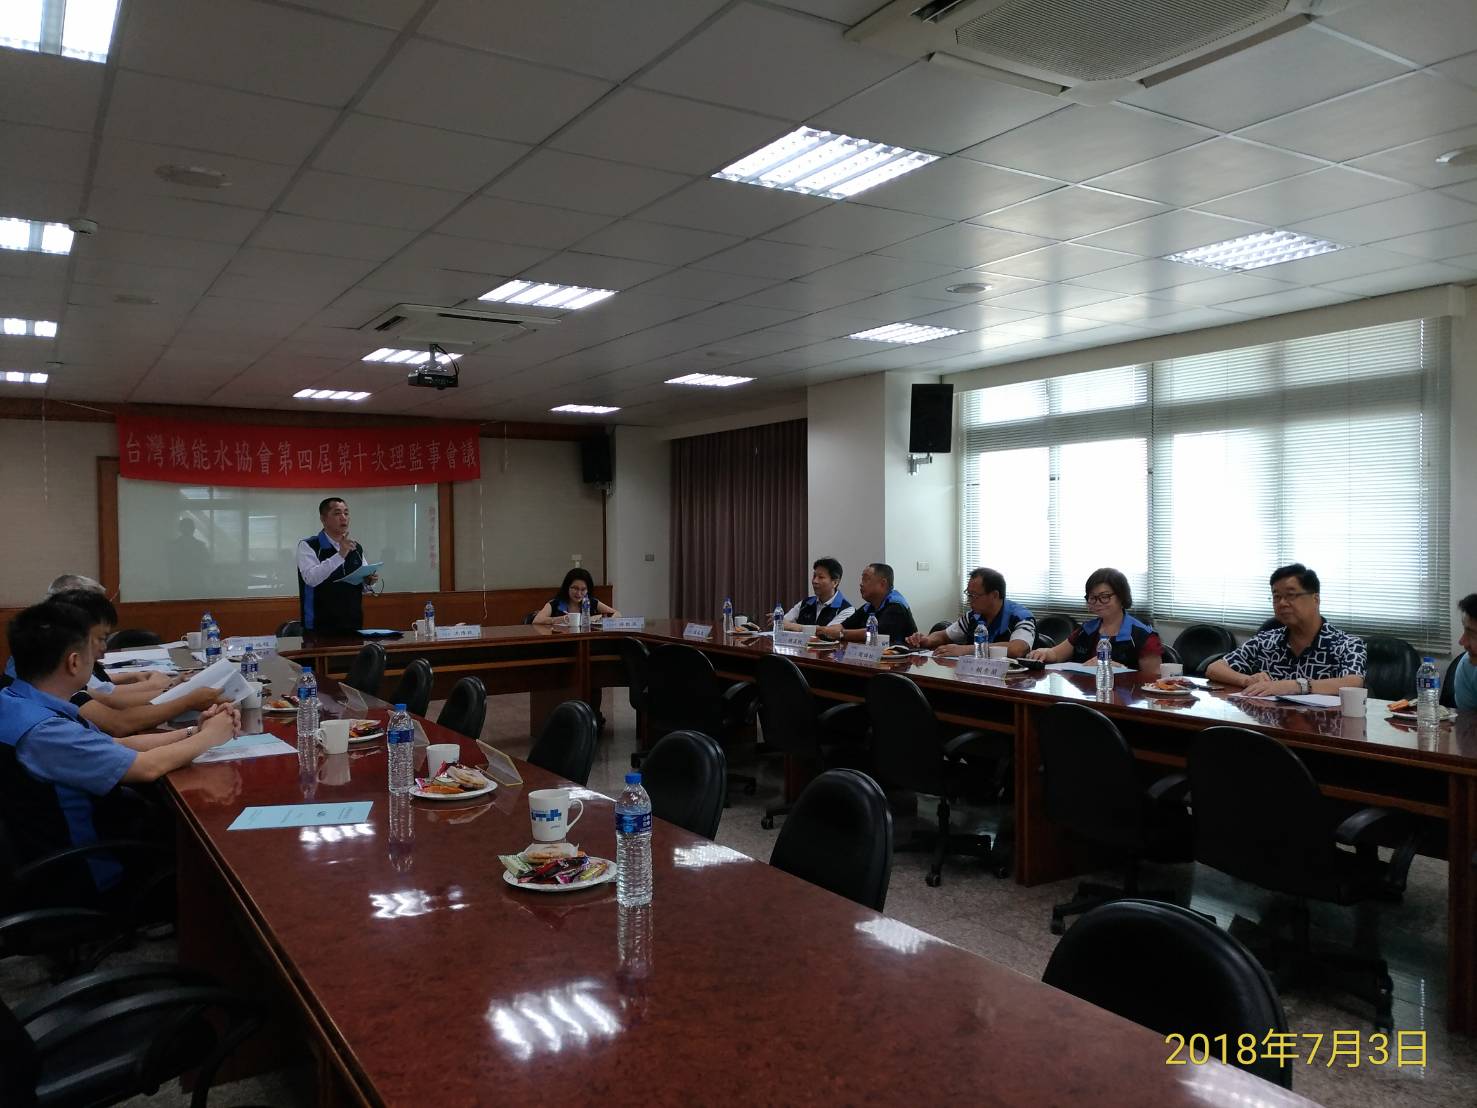 10th Joint Meeting of the 4th Board of Directors and Supervisors (Full Yuan Seafood Restaurant)​​​​​